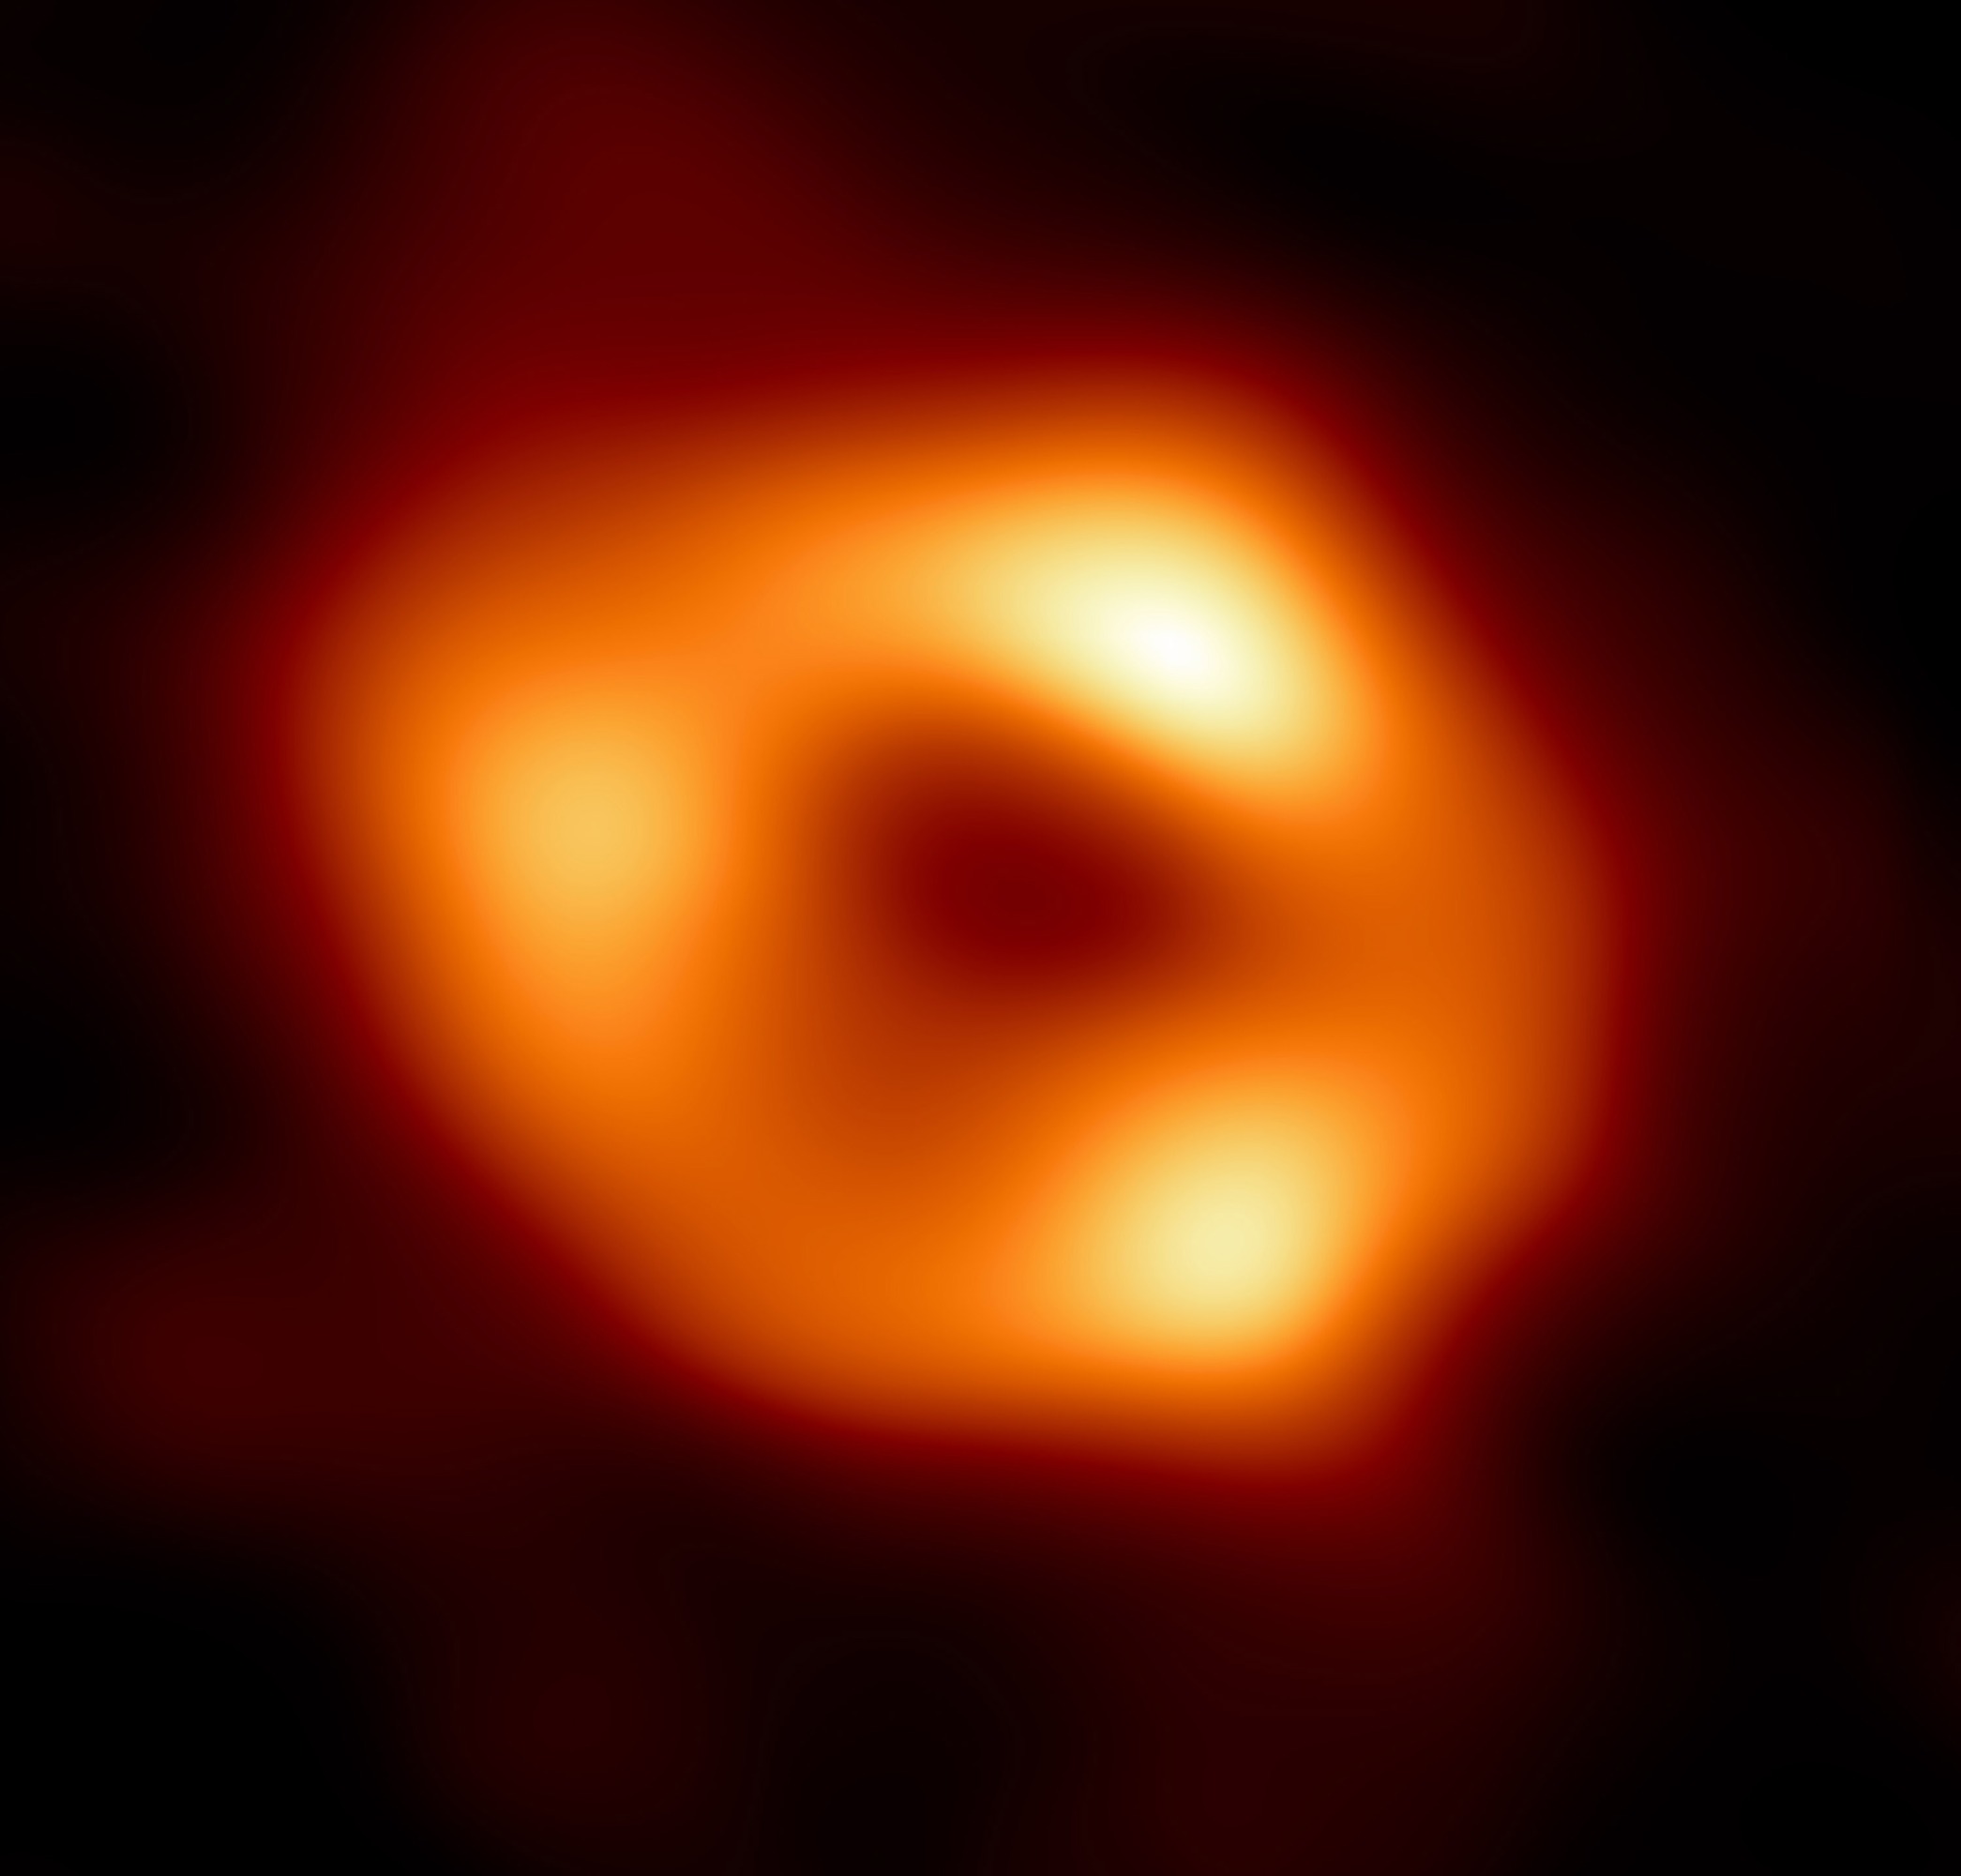 supermassive black hole at center of Milky Way